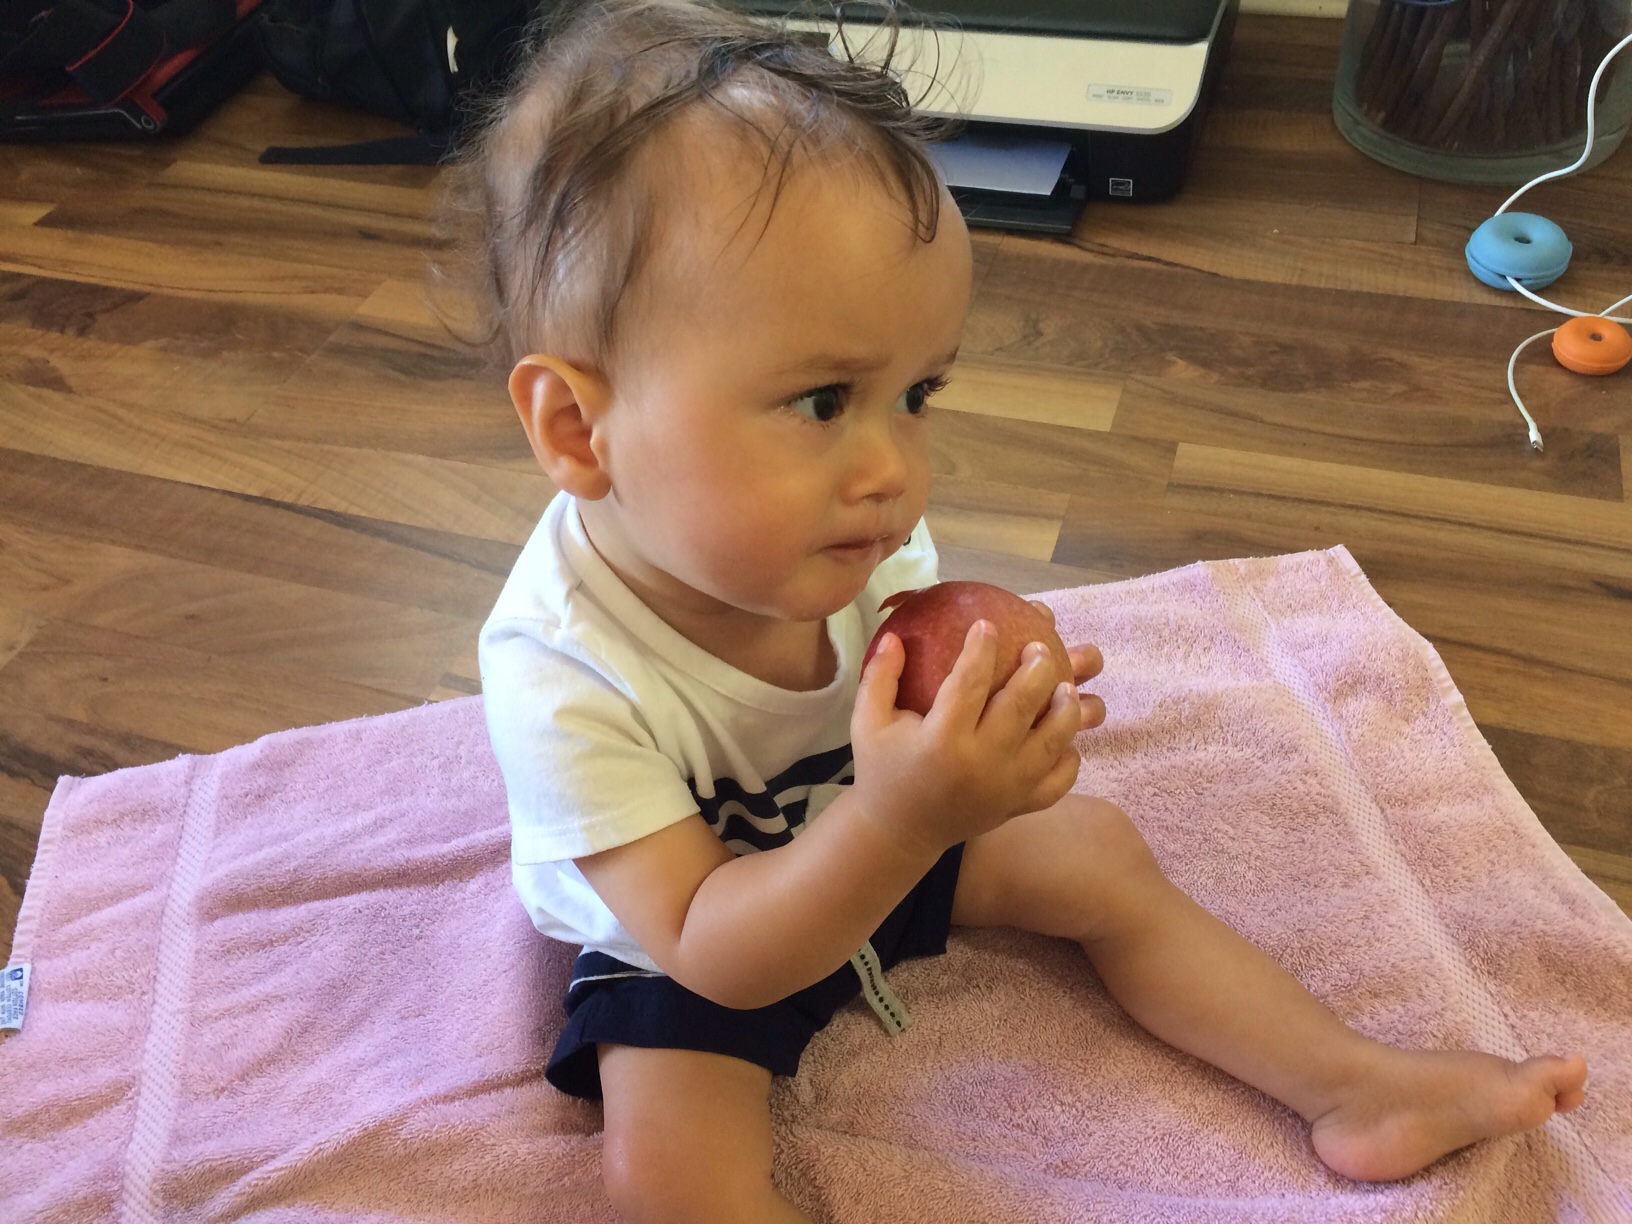 Apple snack time